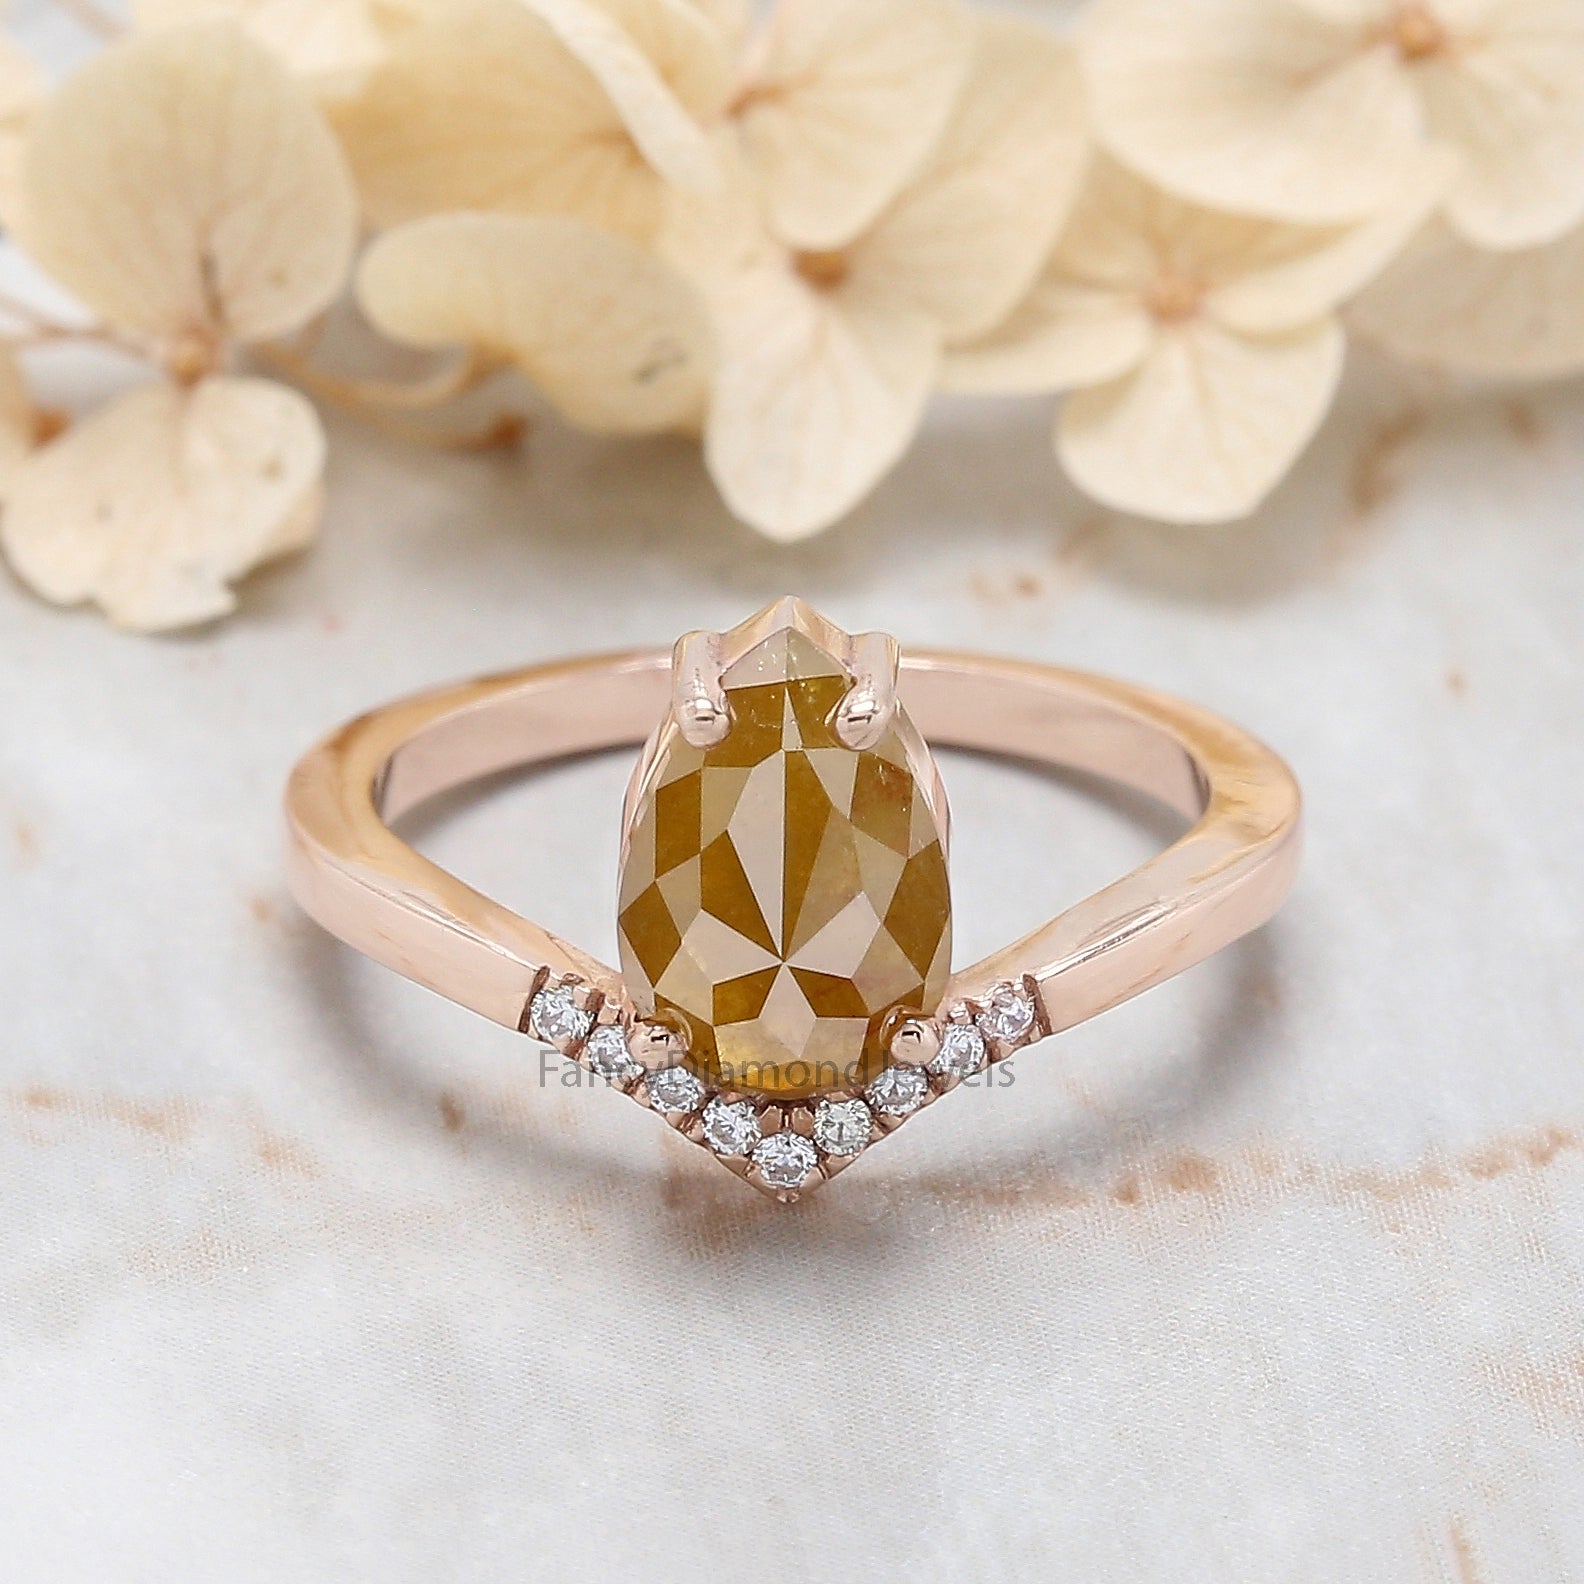 Pear Cut Yellow Color Diamond Ring 1.60 Ct 9.40 MM Pear Shape Diamond Ring 14K Solid Rose Gold Silver Engagement Ring Gift For Her QK2263